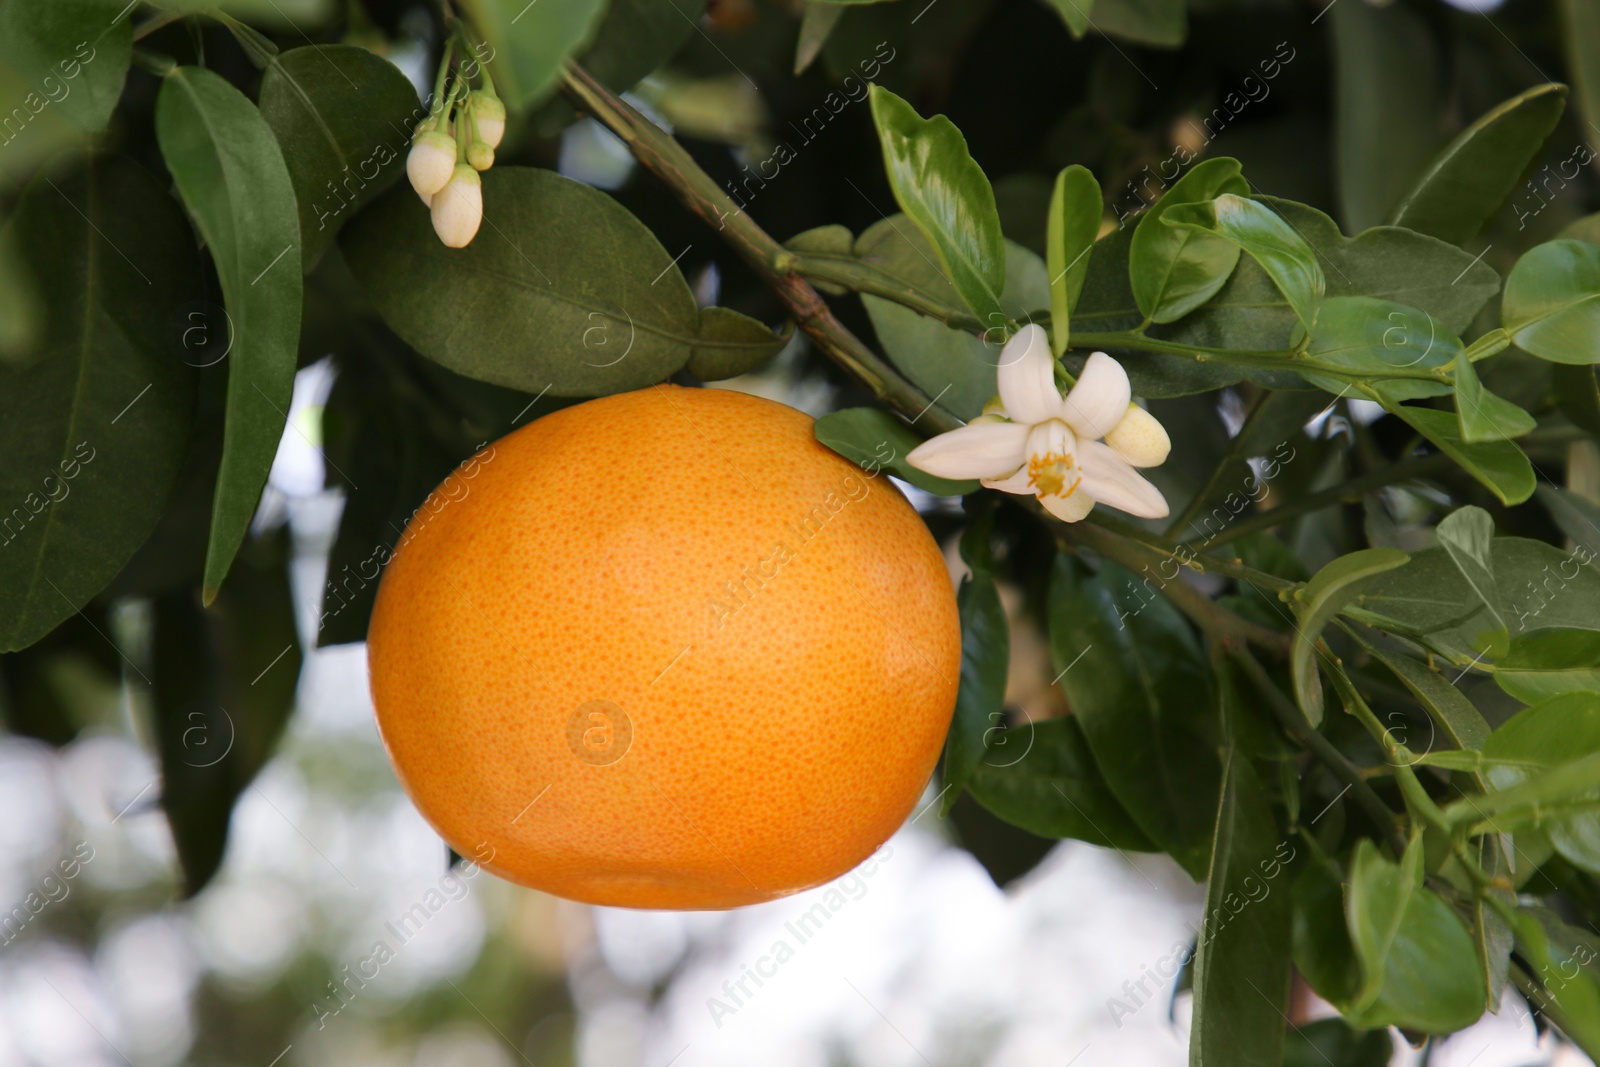 Photo of Ripe grapefruit and flowers growing on tree outdoors